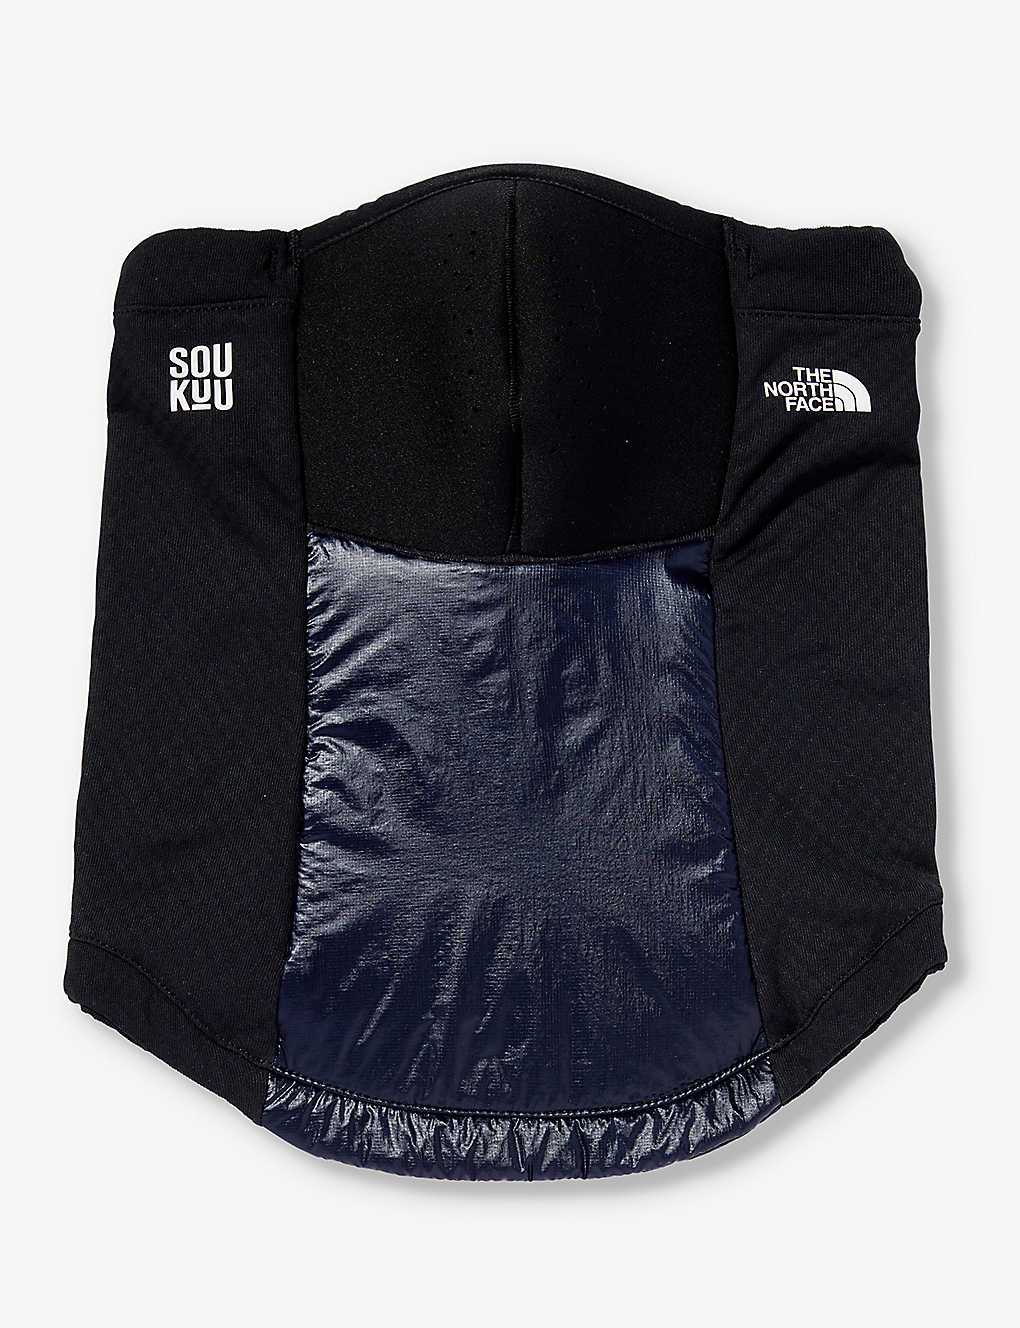 THE NORTH FACE - The North Face x Undercover Soukuu woven neck warmer |  Selfridges.com